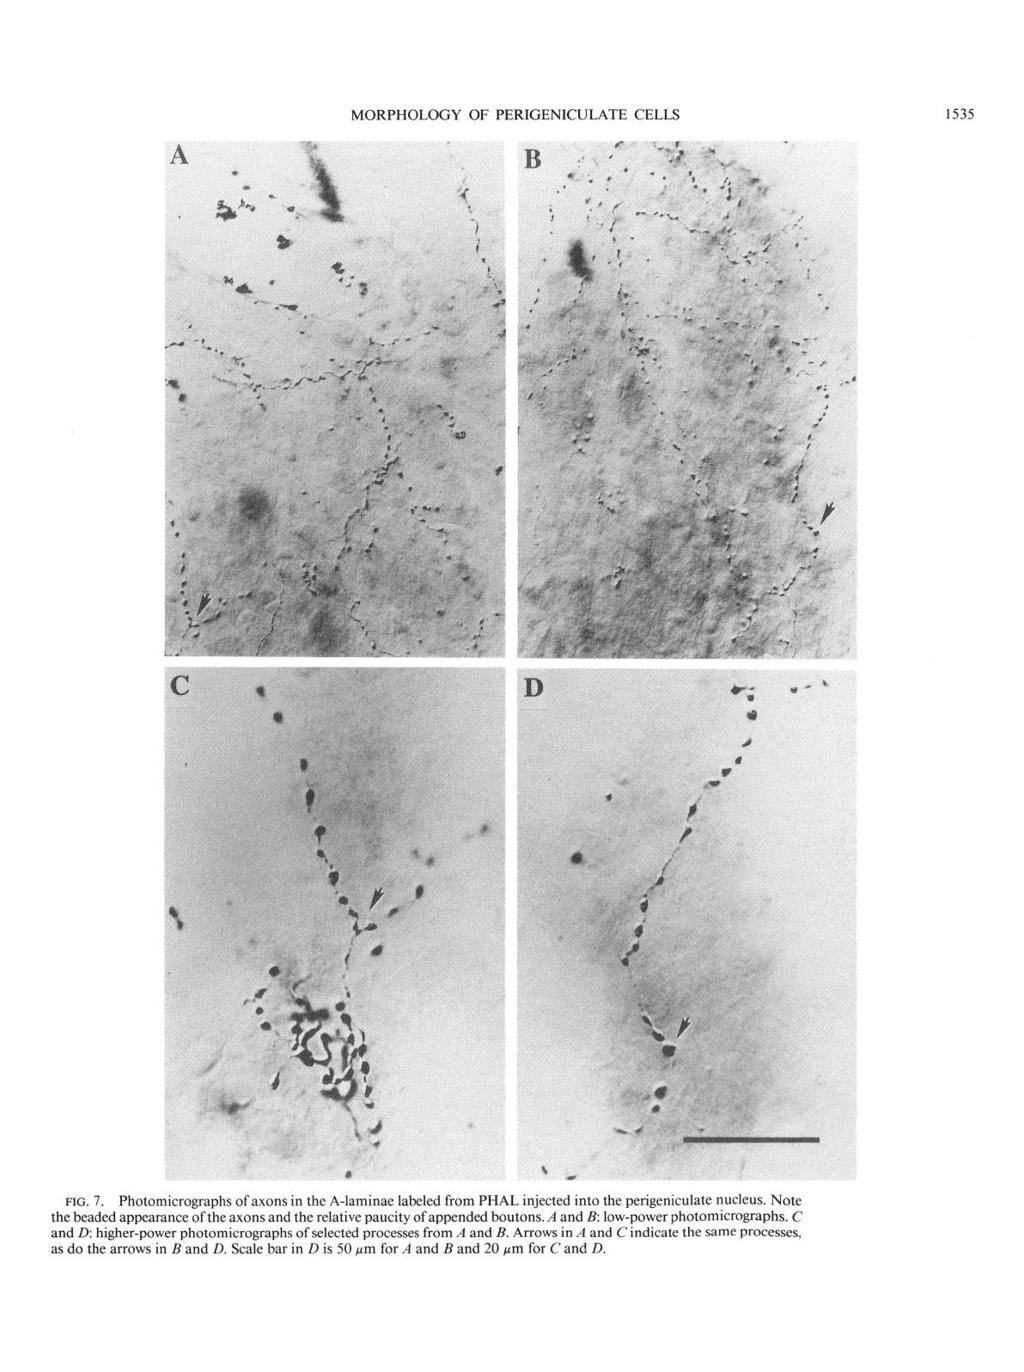 MORPHOLOGY OF PERIGENICULATE CELLS 1535 F IG. 7. Photomicrographs of axons in the A-laminae labeled from PHAL injected into the perigeniculate nucleus.